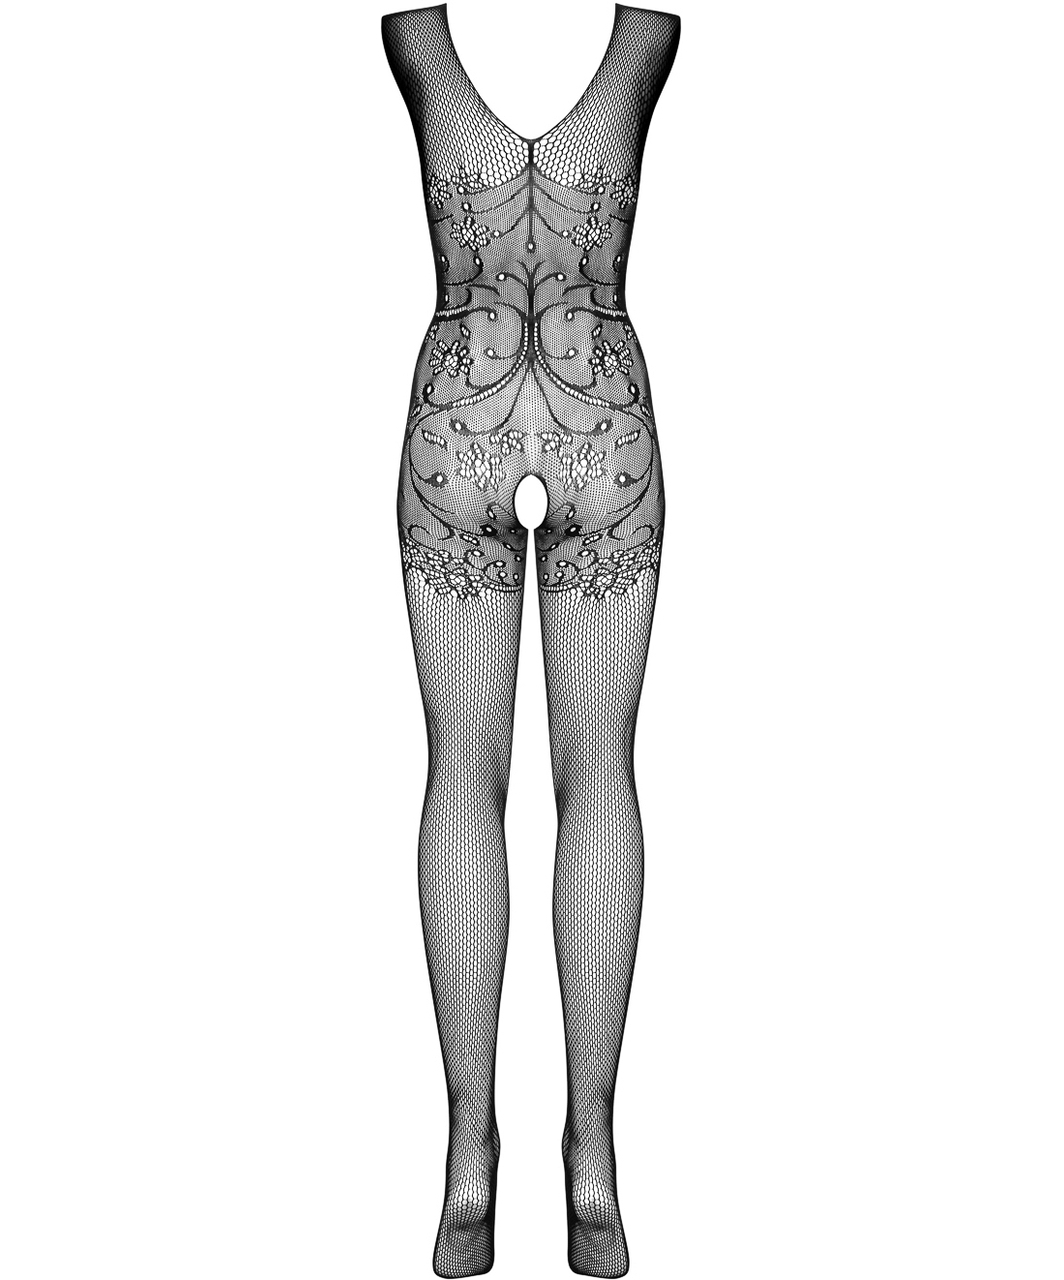 Obsessive black net crotchless bodystocking